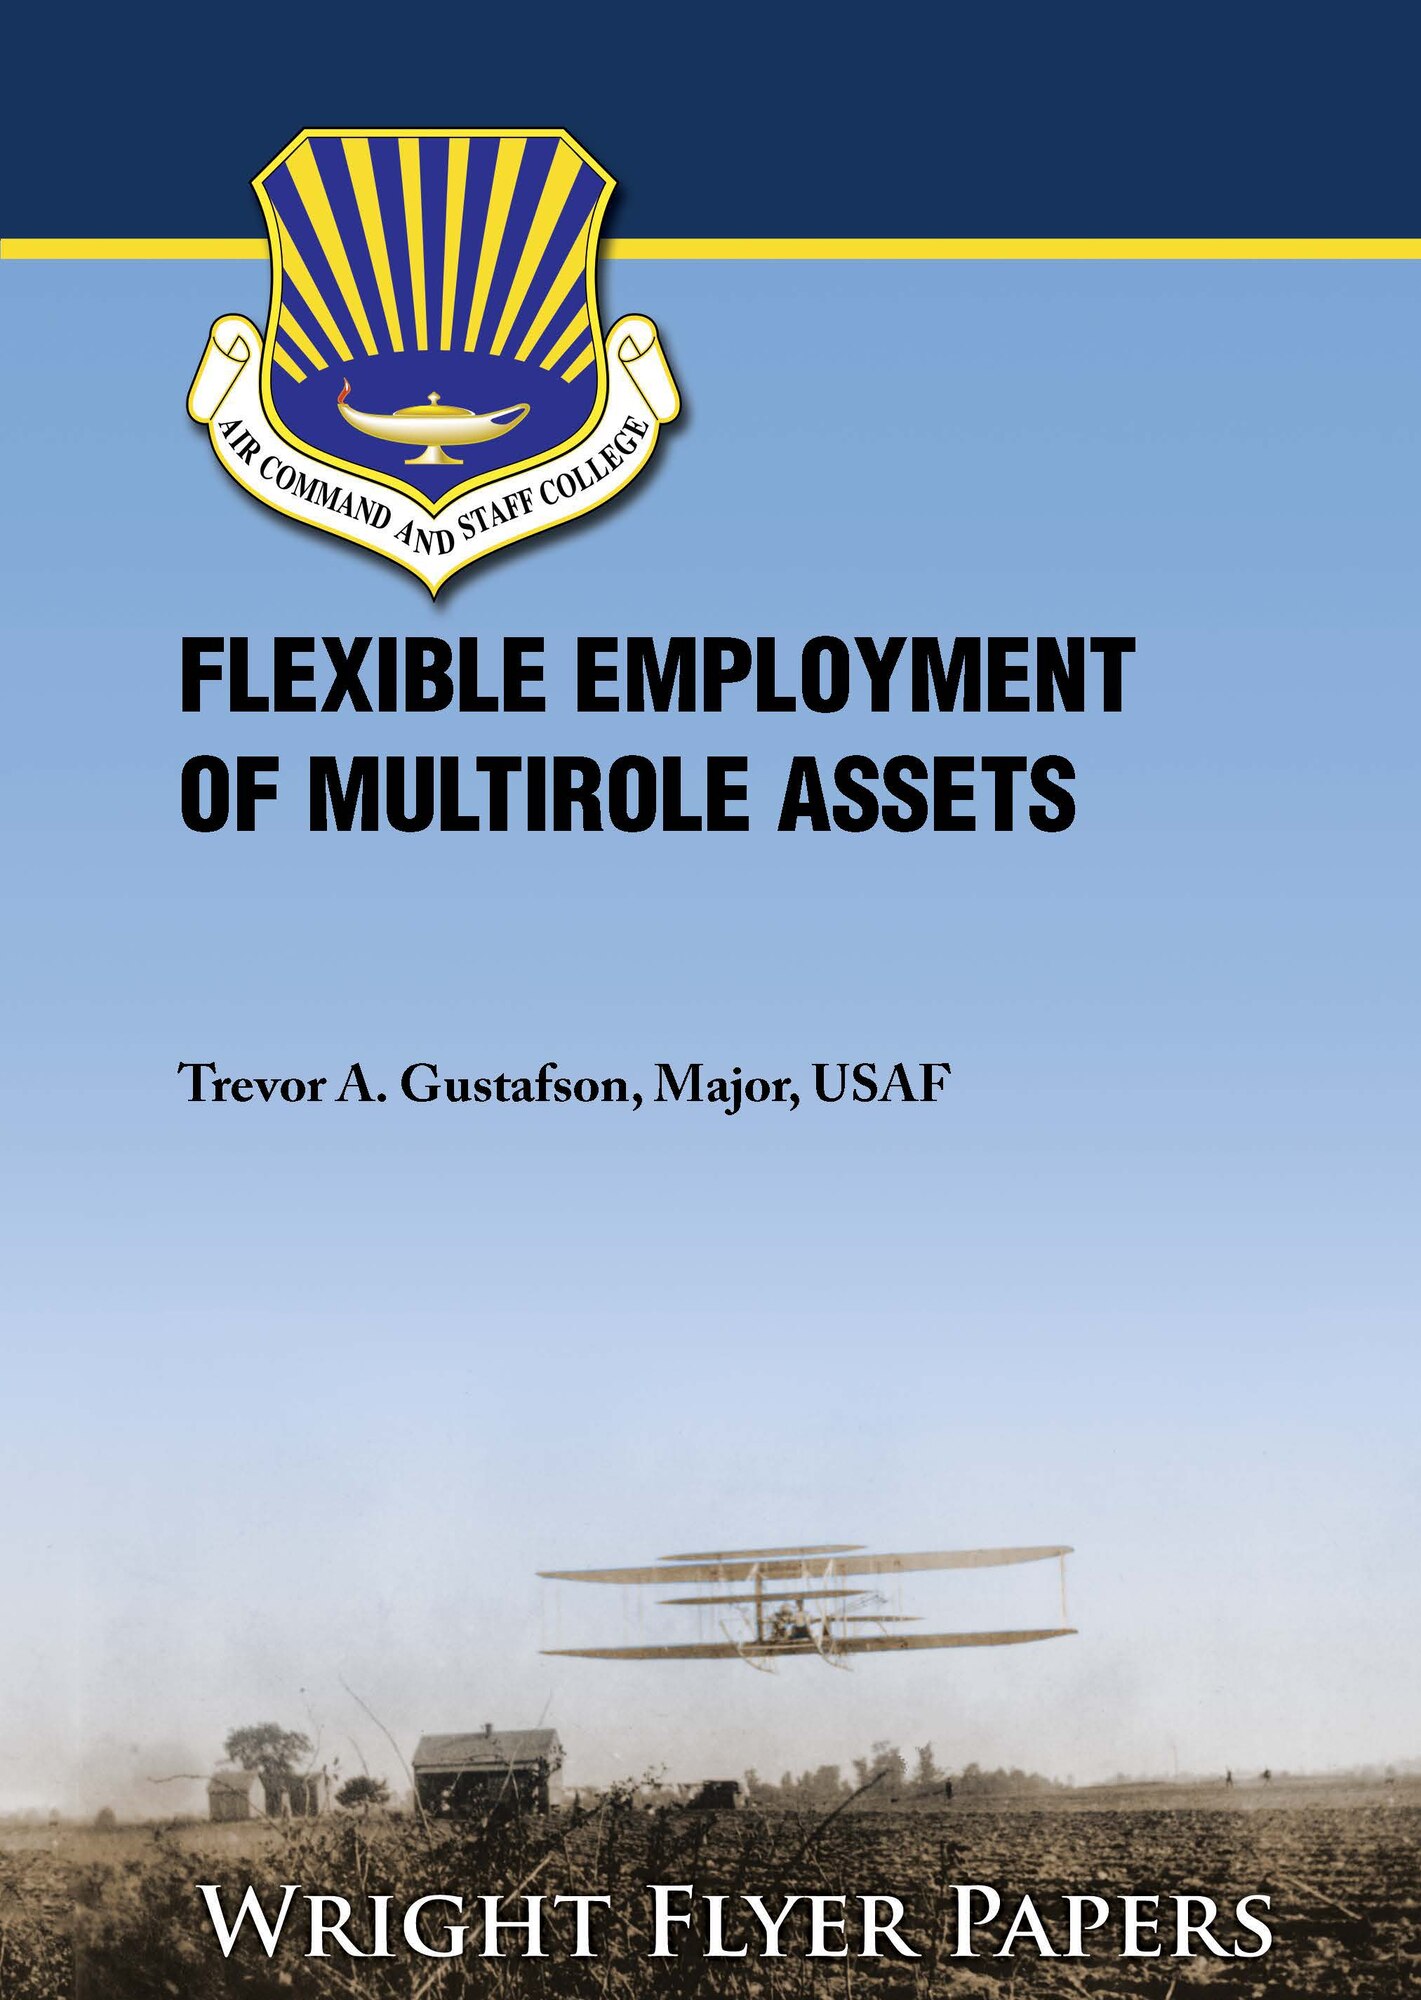 Selected by Air Command and Staff College as a Wright Flyer Paper, Flexible Employment of Multi-Role Assets by Maj. Trevor A. Gustafson, discusses how existing doctrine is antiquated and does not align well with current mission requirements and equipment.